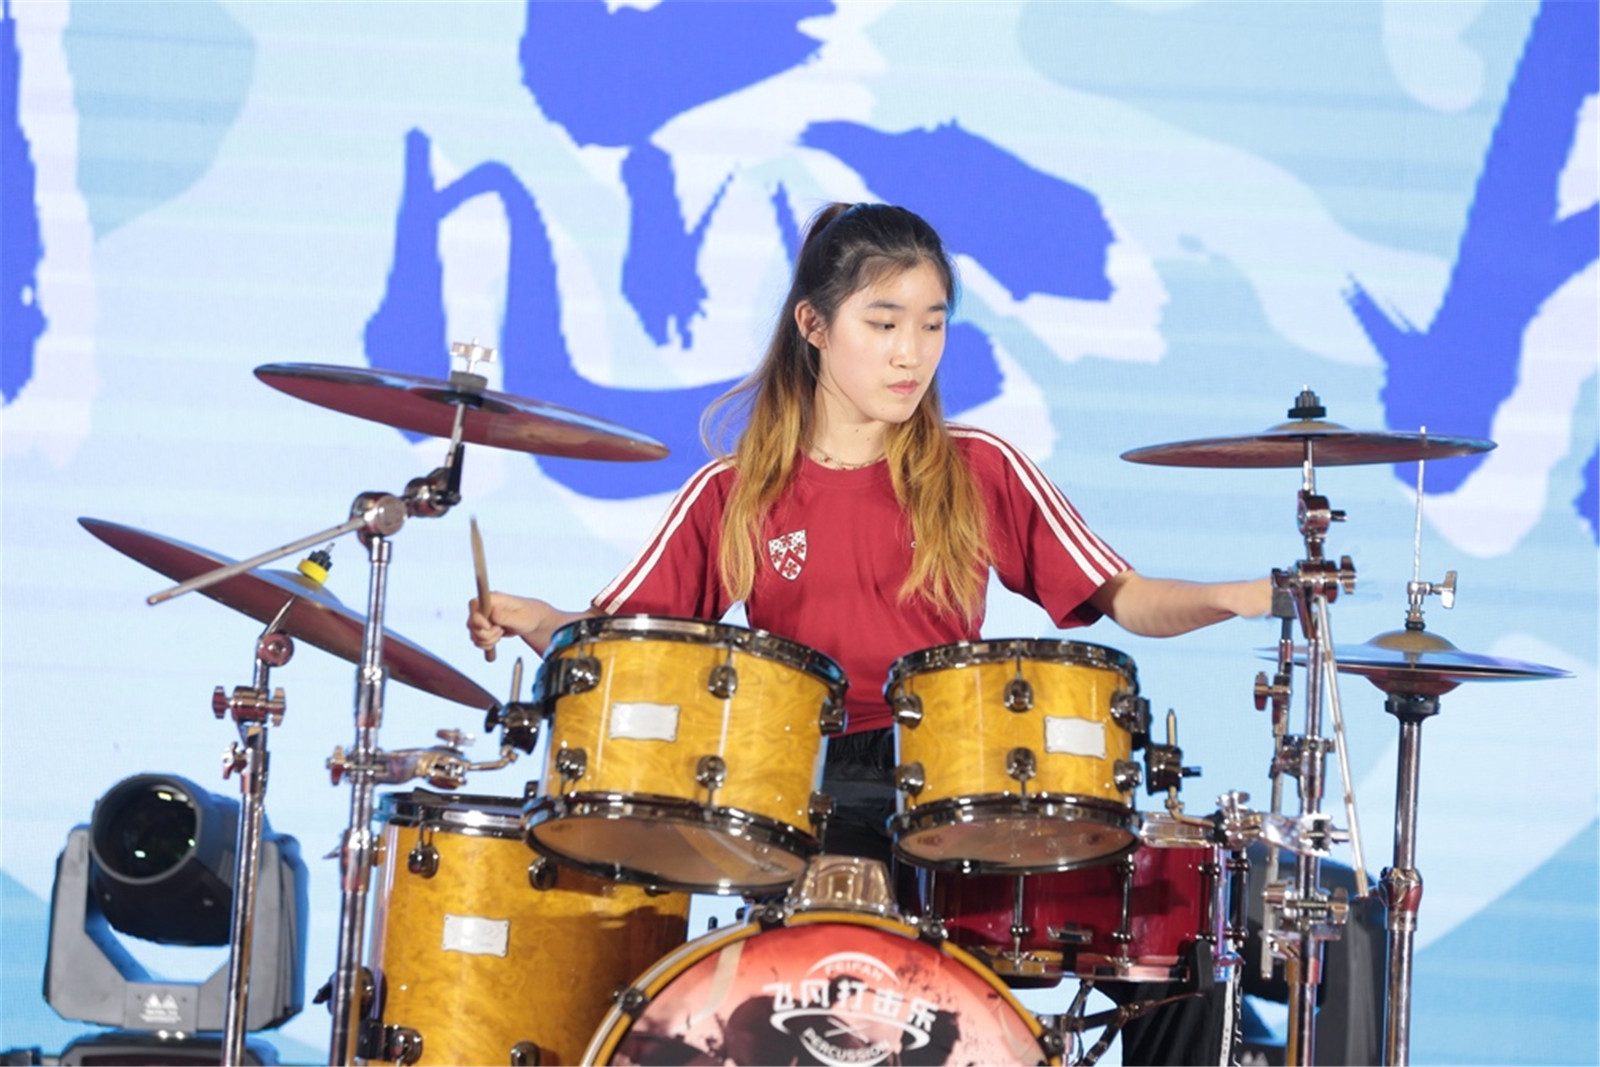 Ellie competing in a drums competition